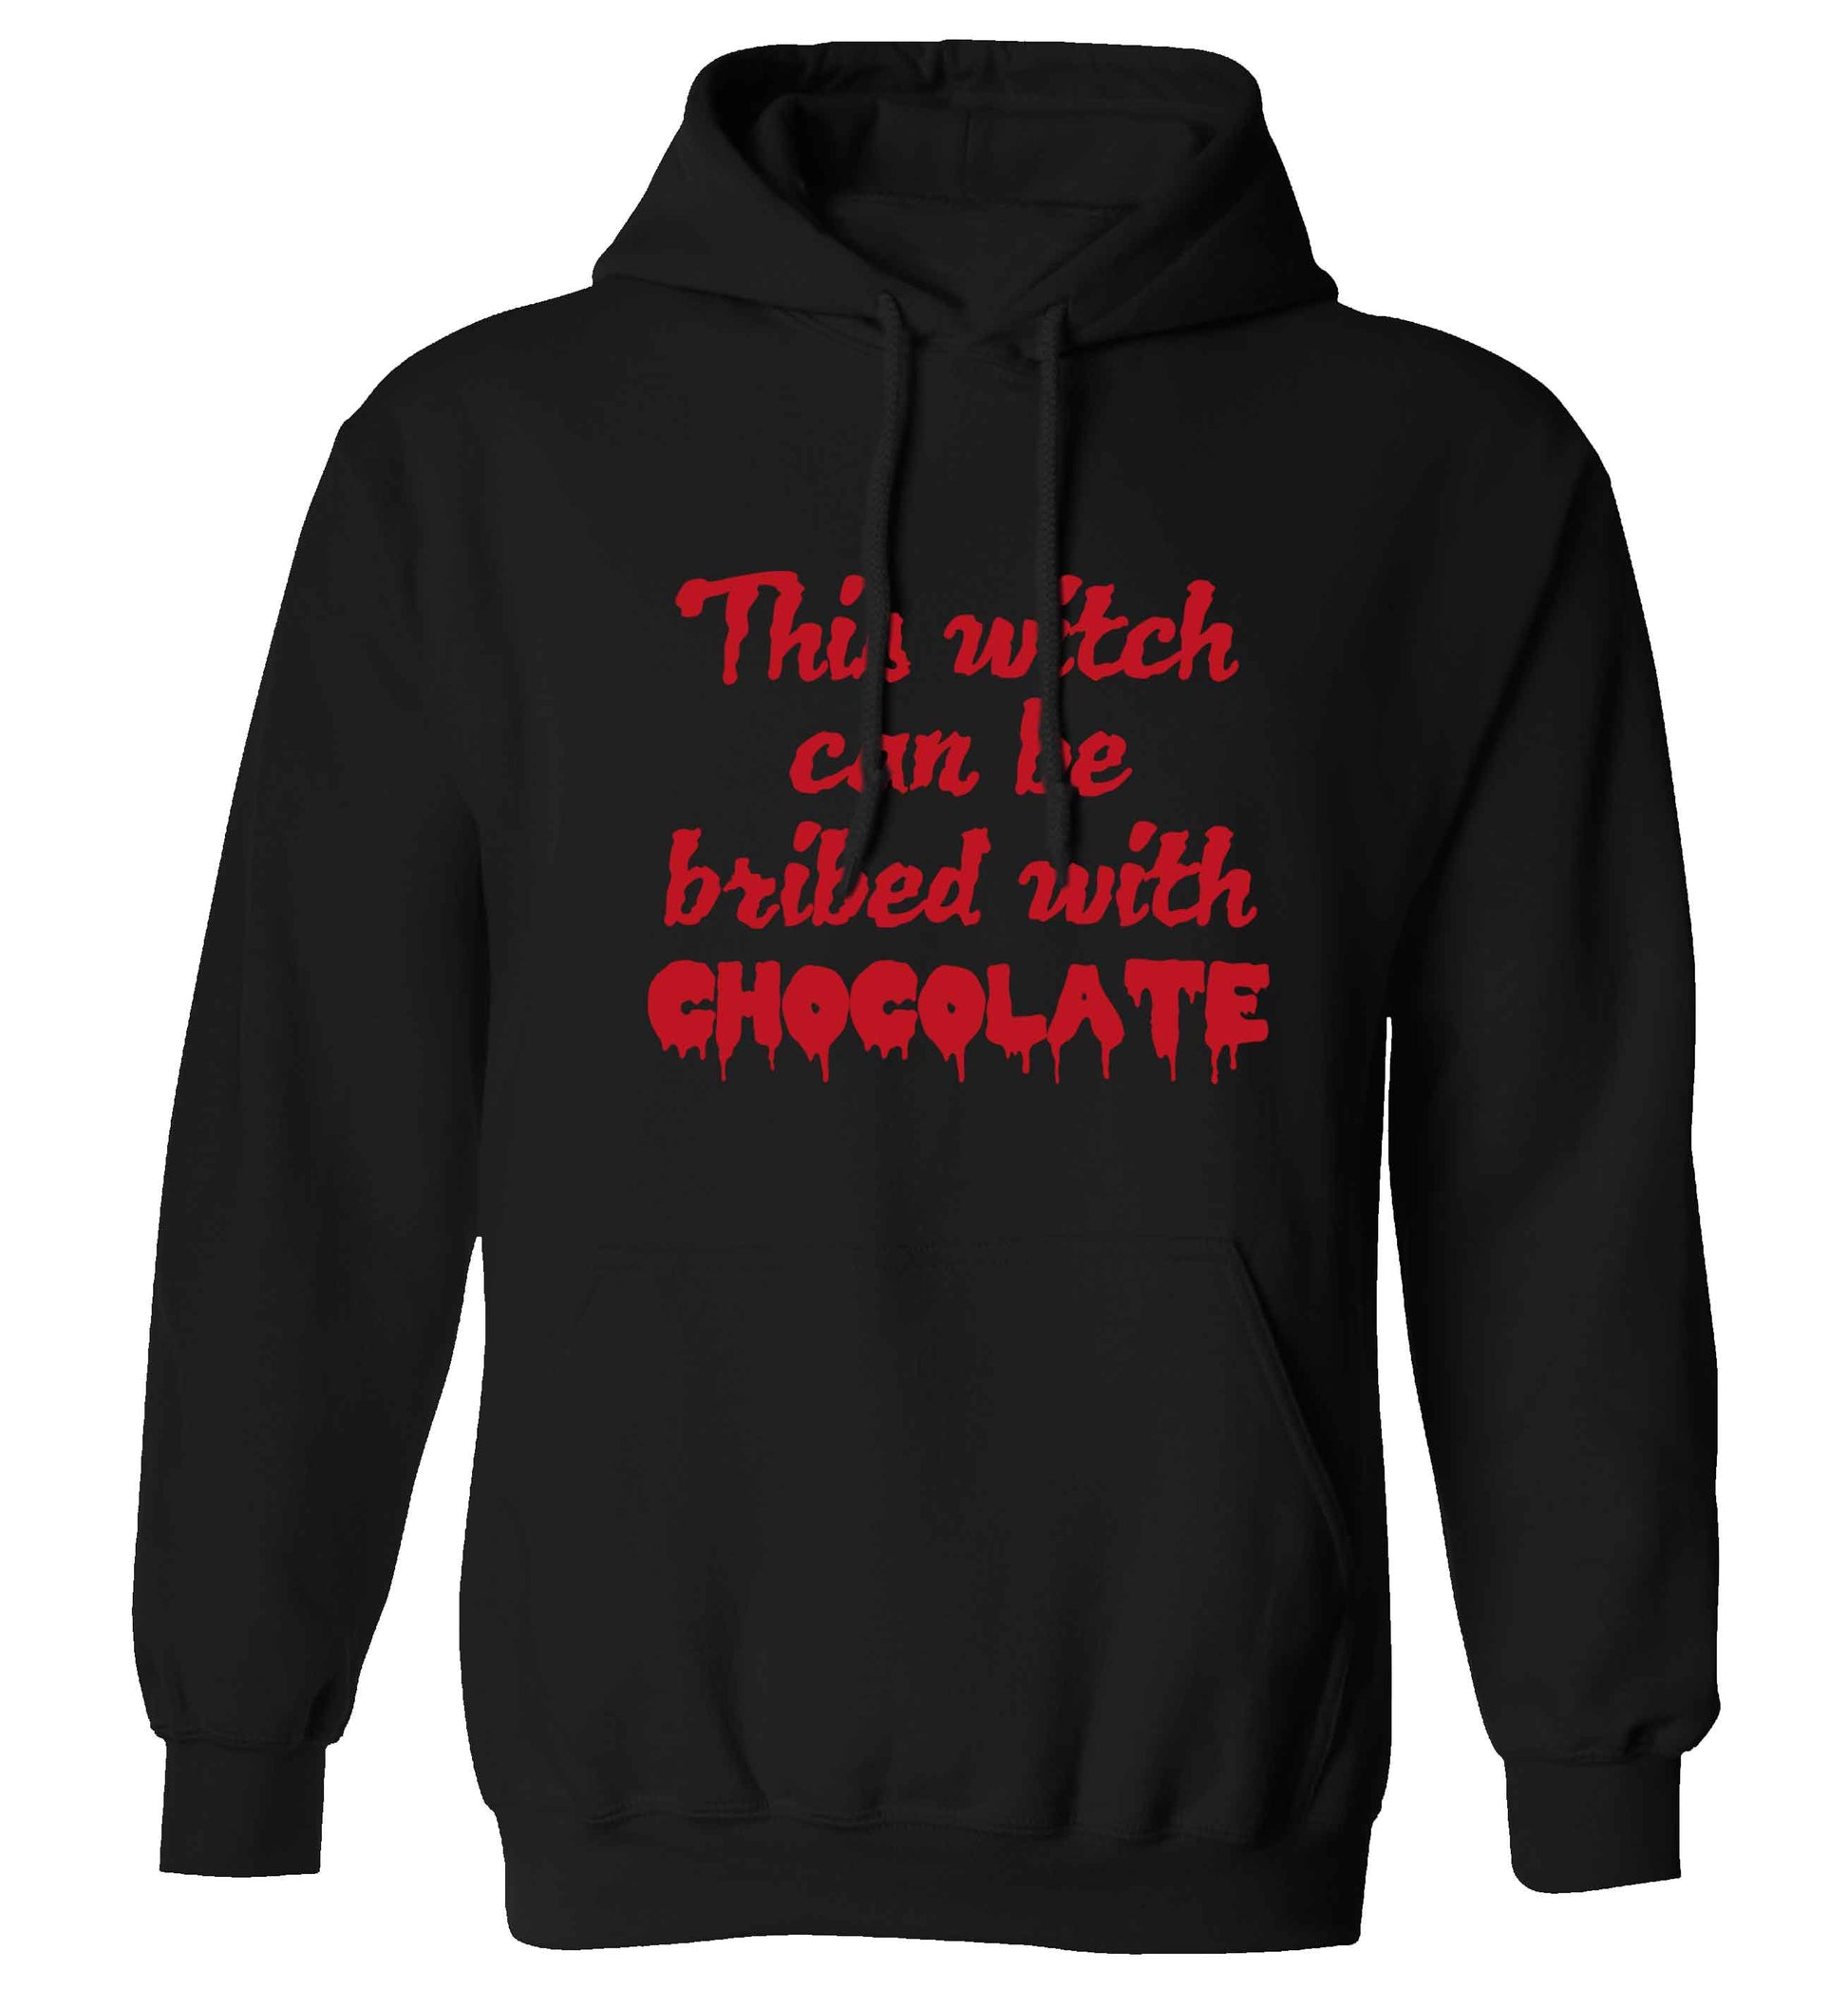 This witch can be bribed with chocolate adults unisex black hoodie 2XL